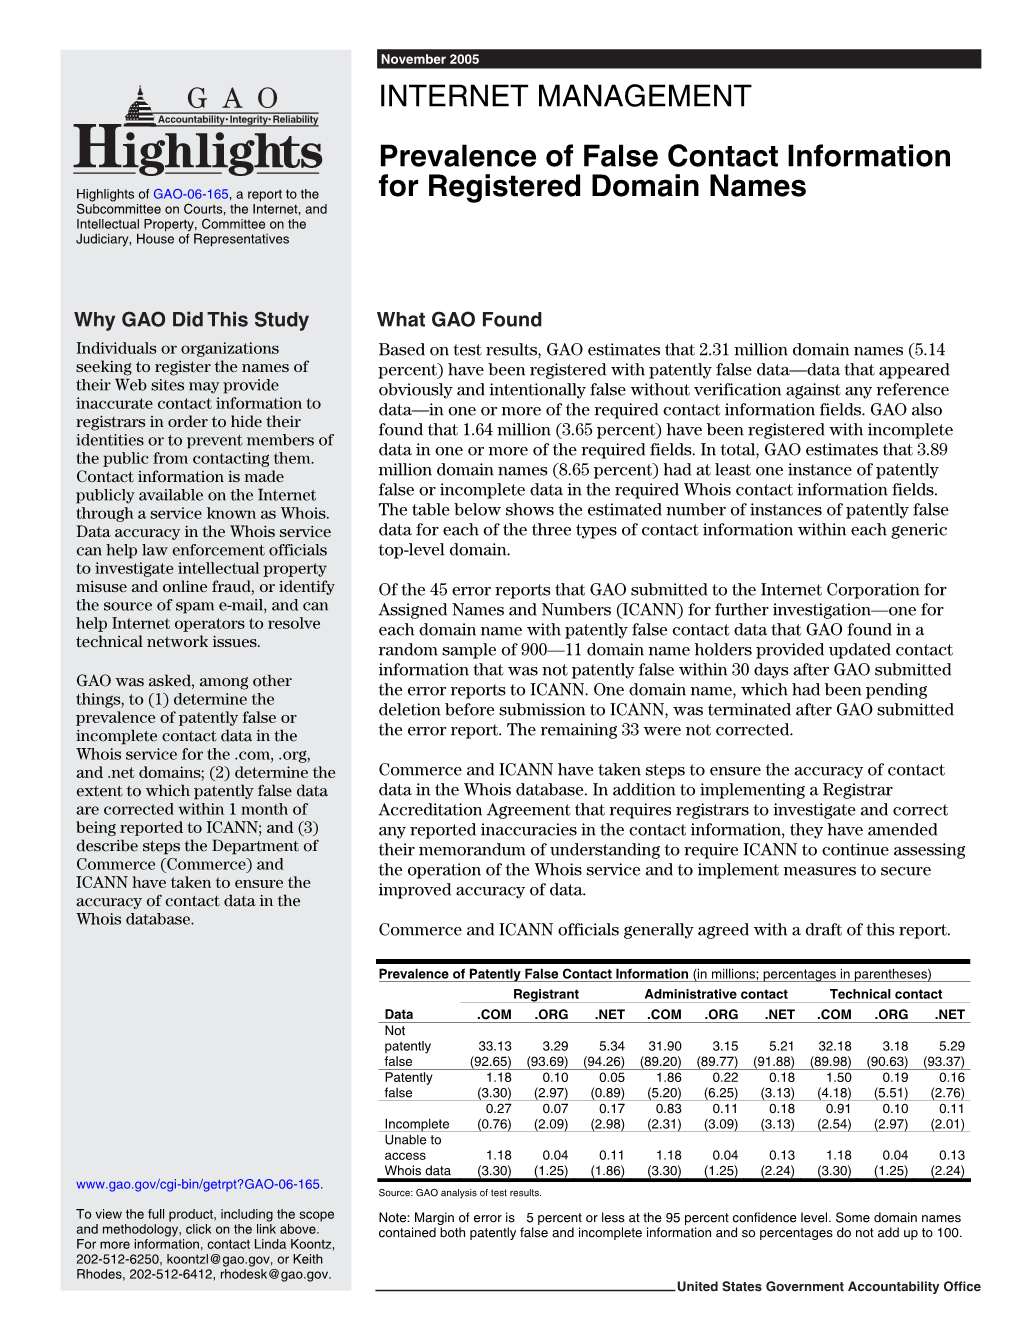 GAO-06-165 Highlights, INTERNET MANAGEMENT: Prevalence of False Contact Information for Registered Domain Names